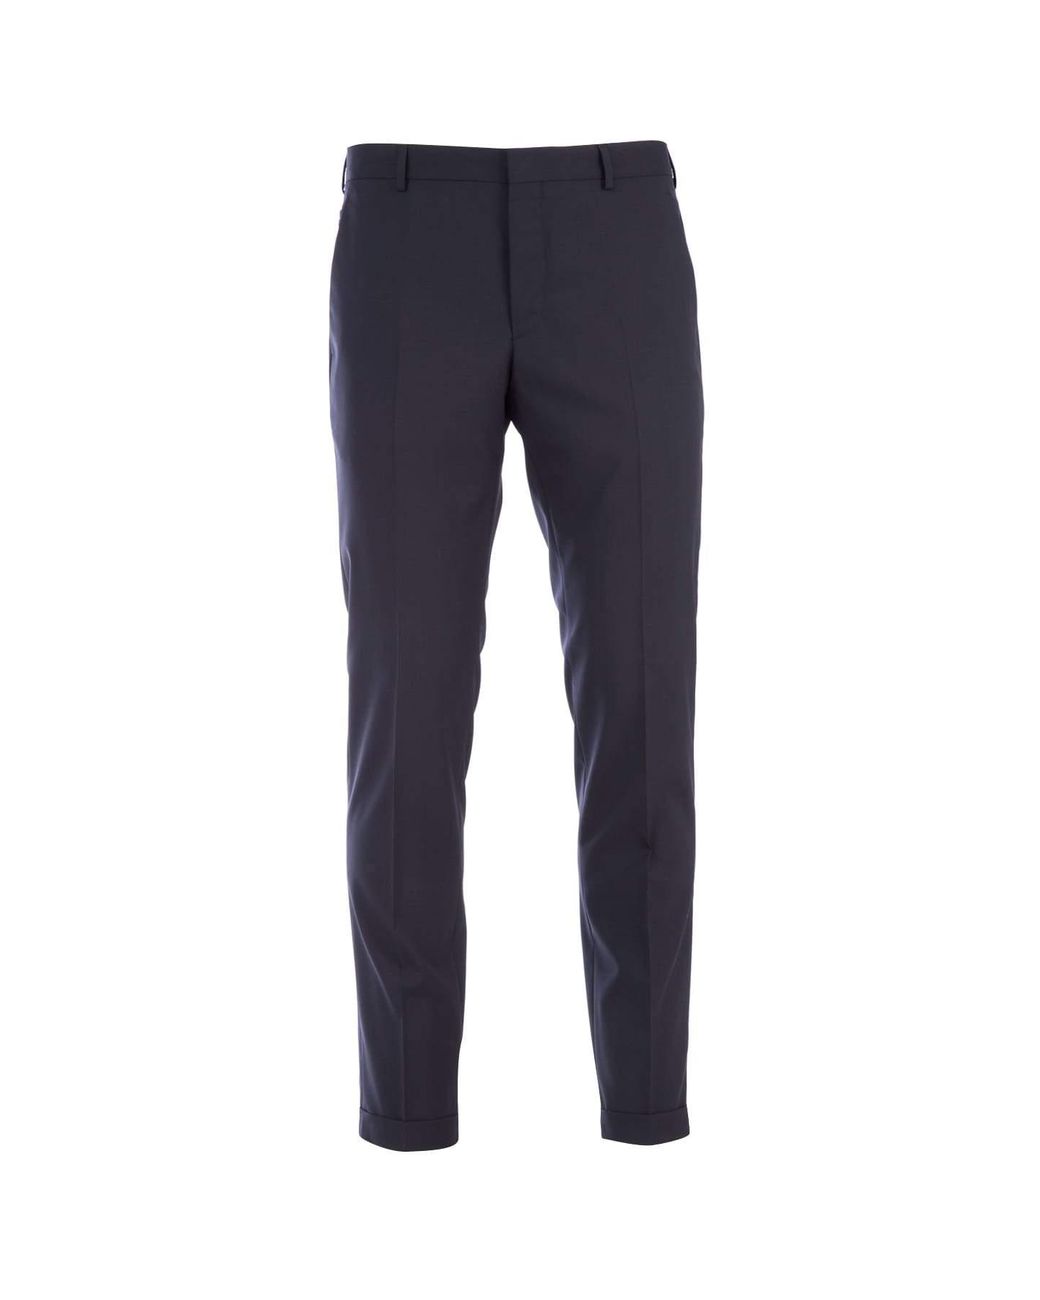 Prada Wool Tailored Trousers in Navy (Blue) for Men - Save 6% - Lyst